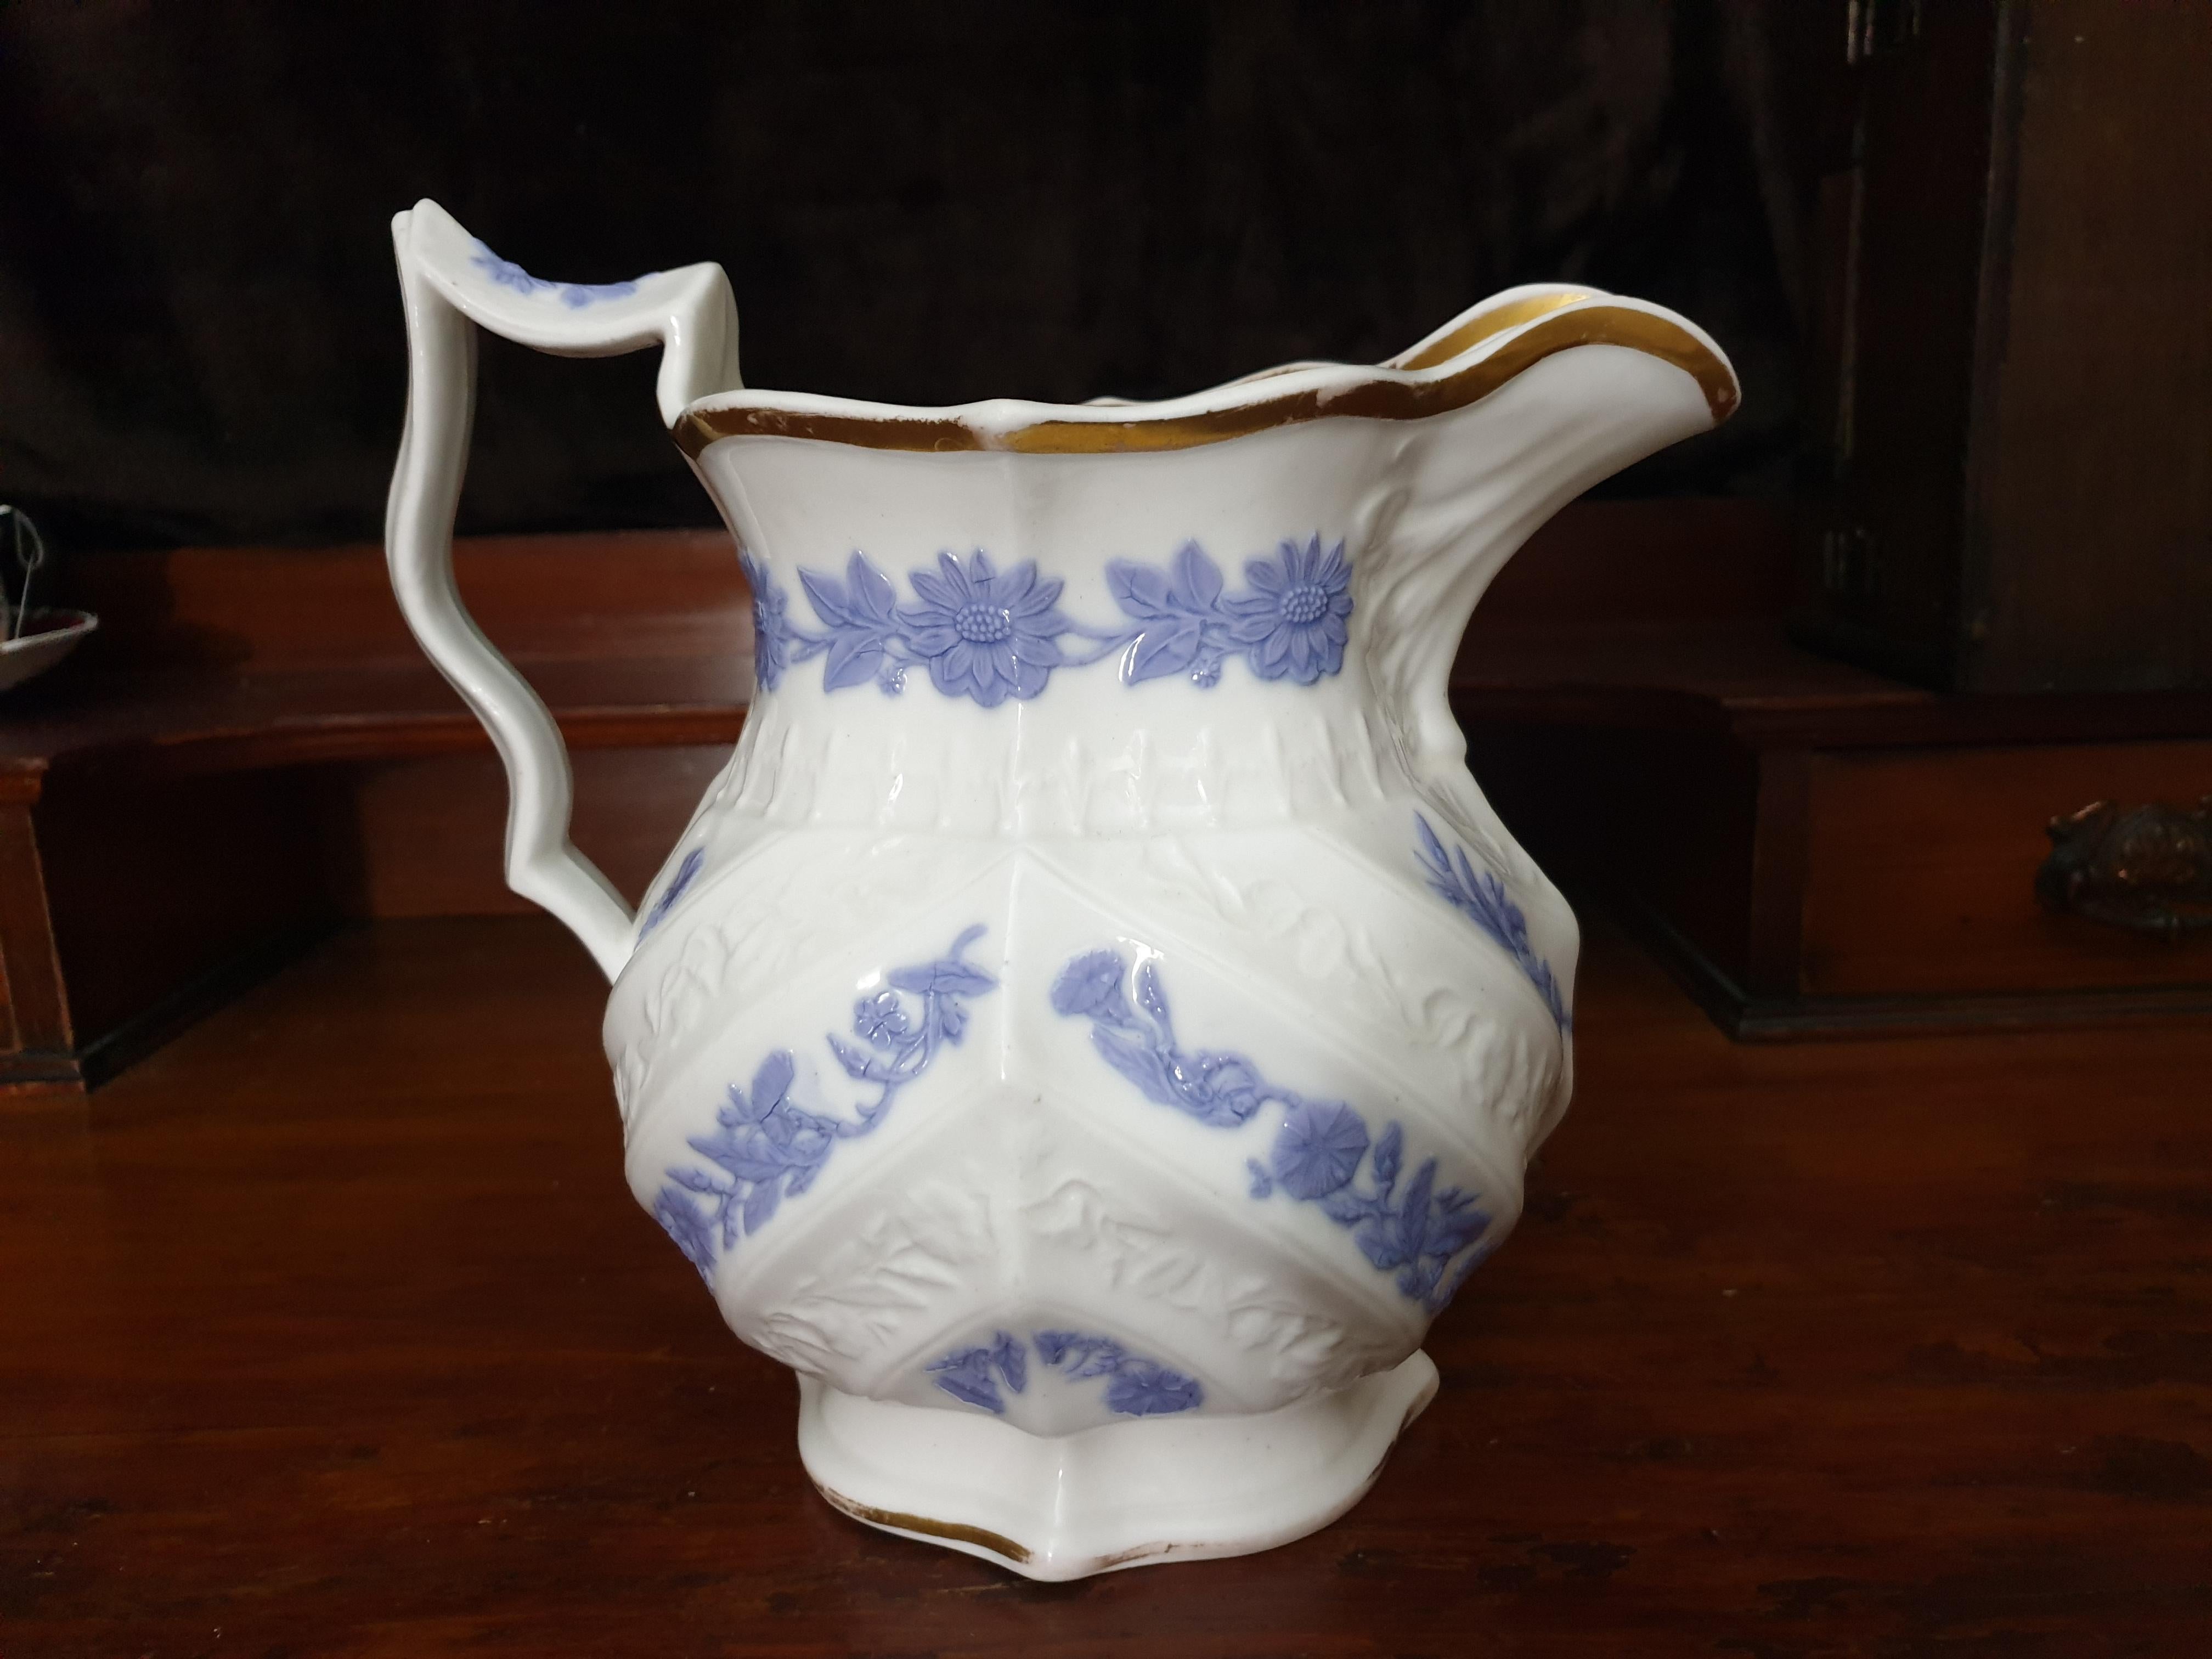 A large Royal Copenhagen water jug, glazed finished with violet embossed sun flowers and flowers finished in 24-karat gold gilt with white embossed flowers. Minor loss of gilding.